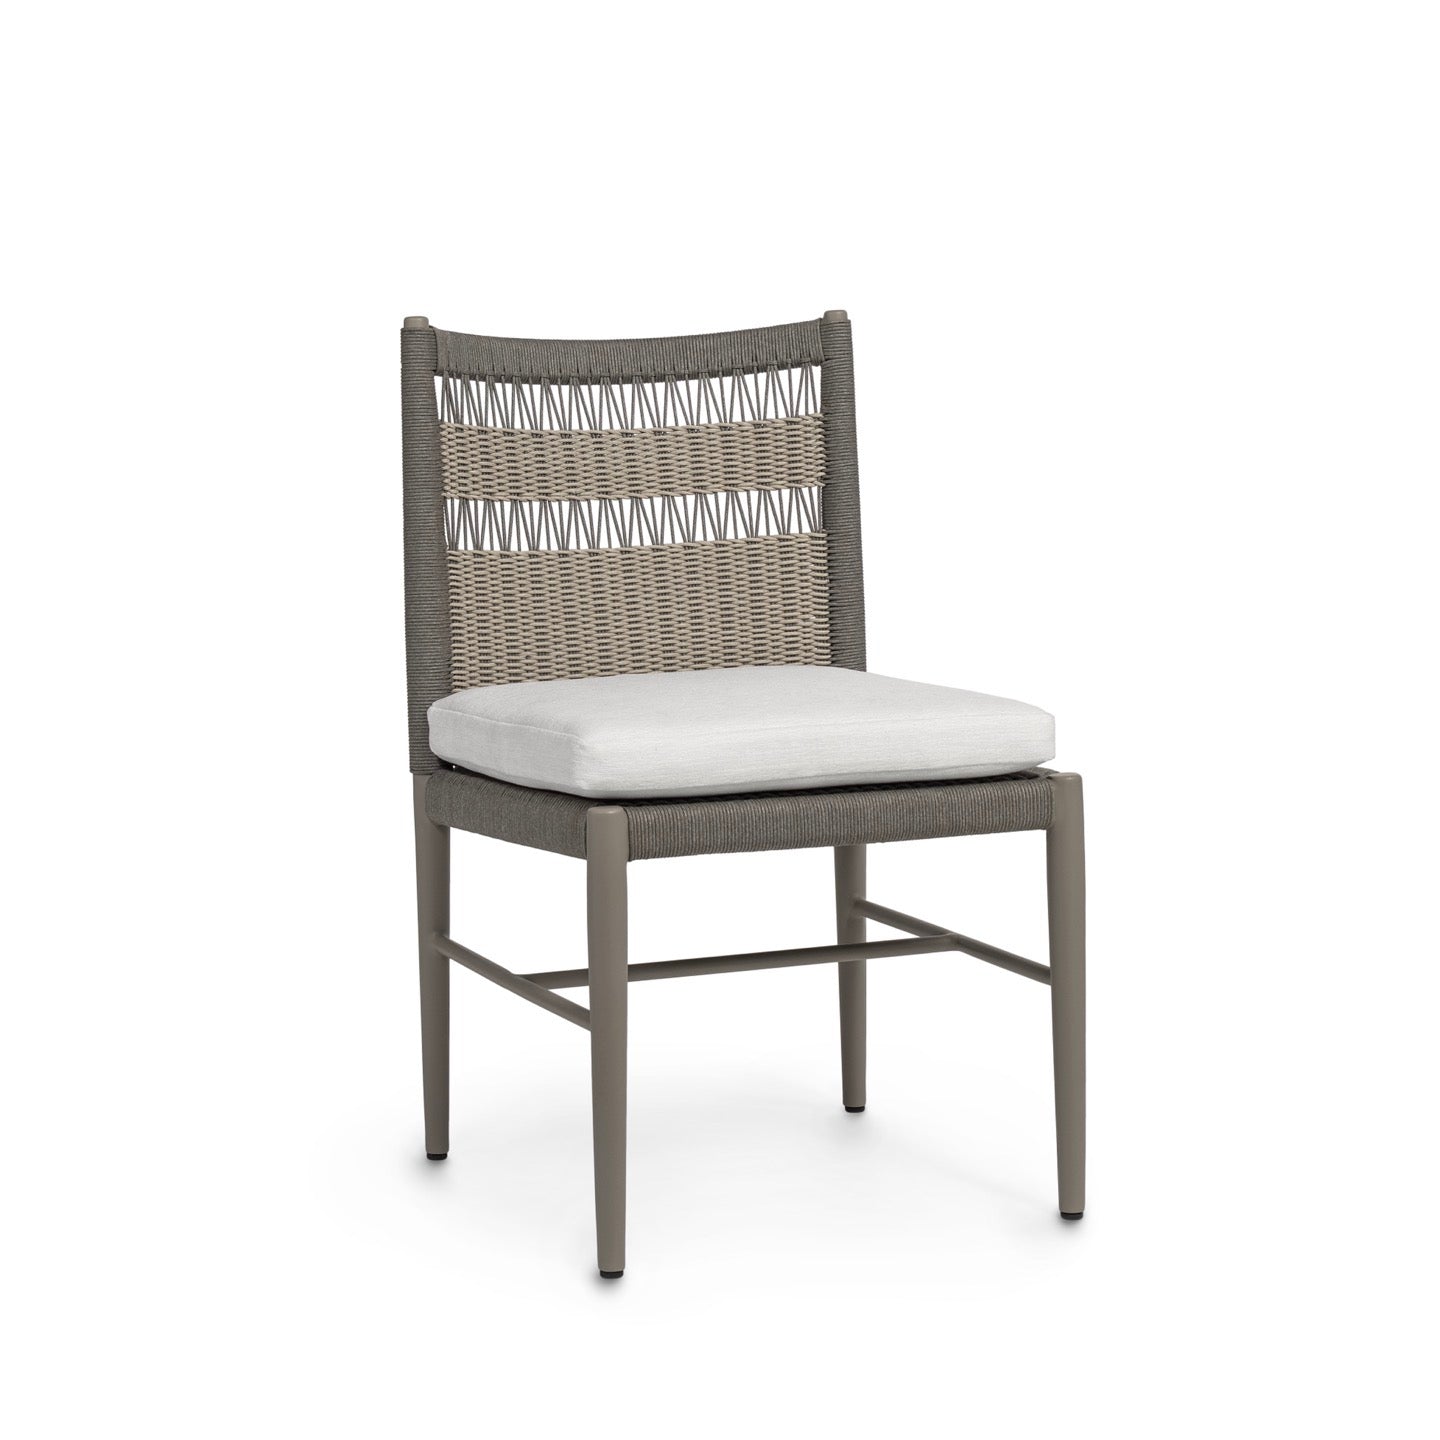 St. George Outdoor Side Chair